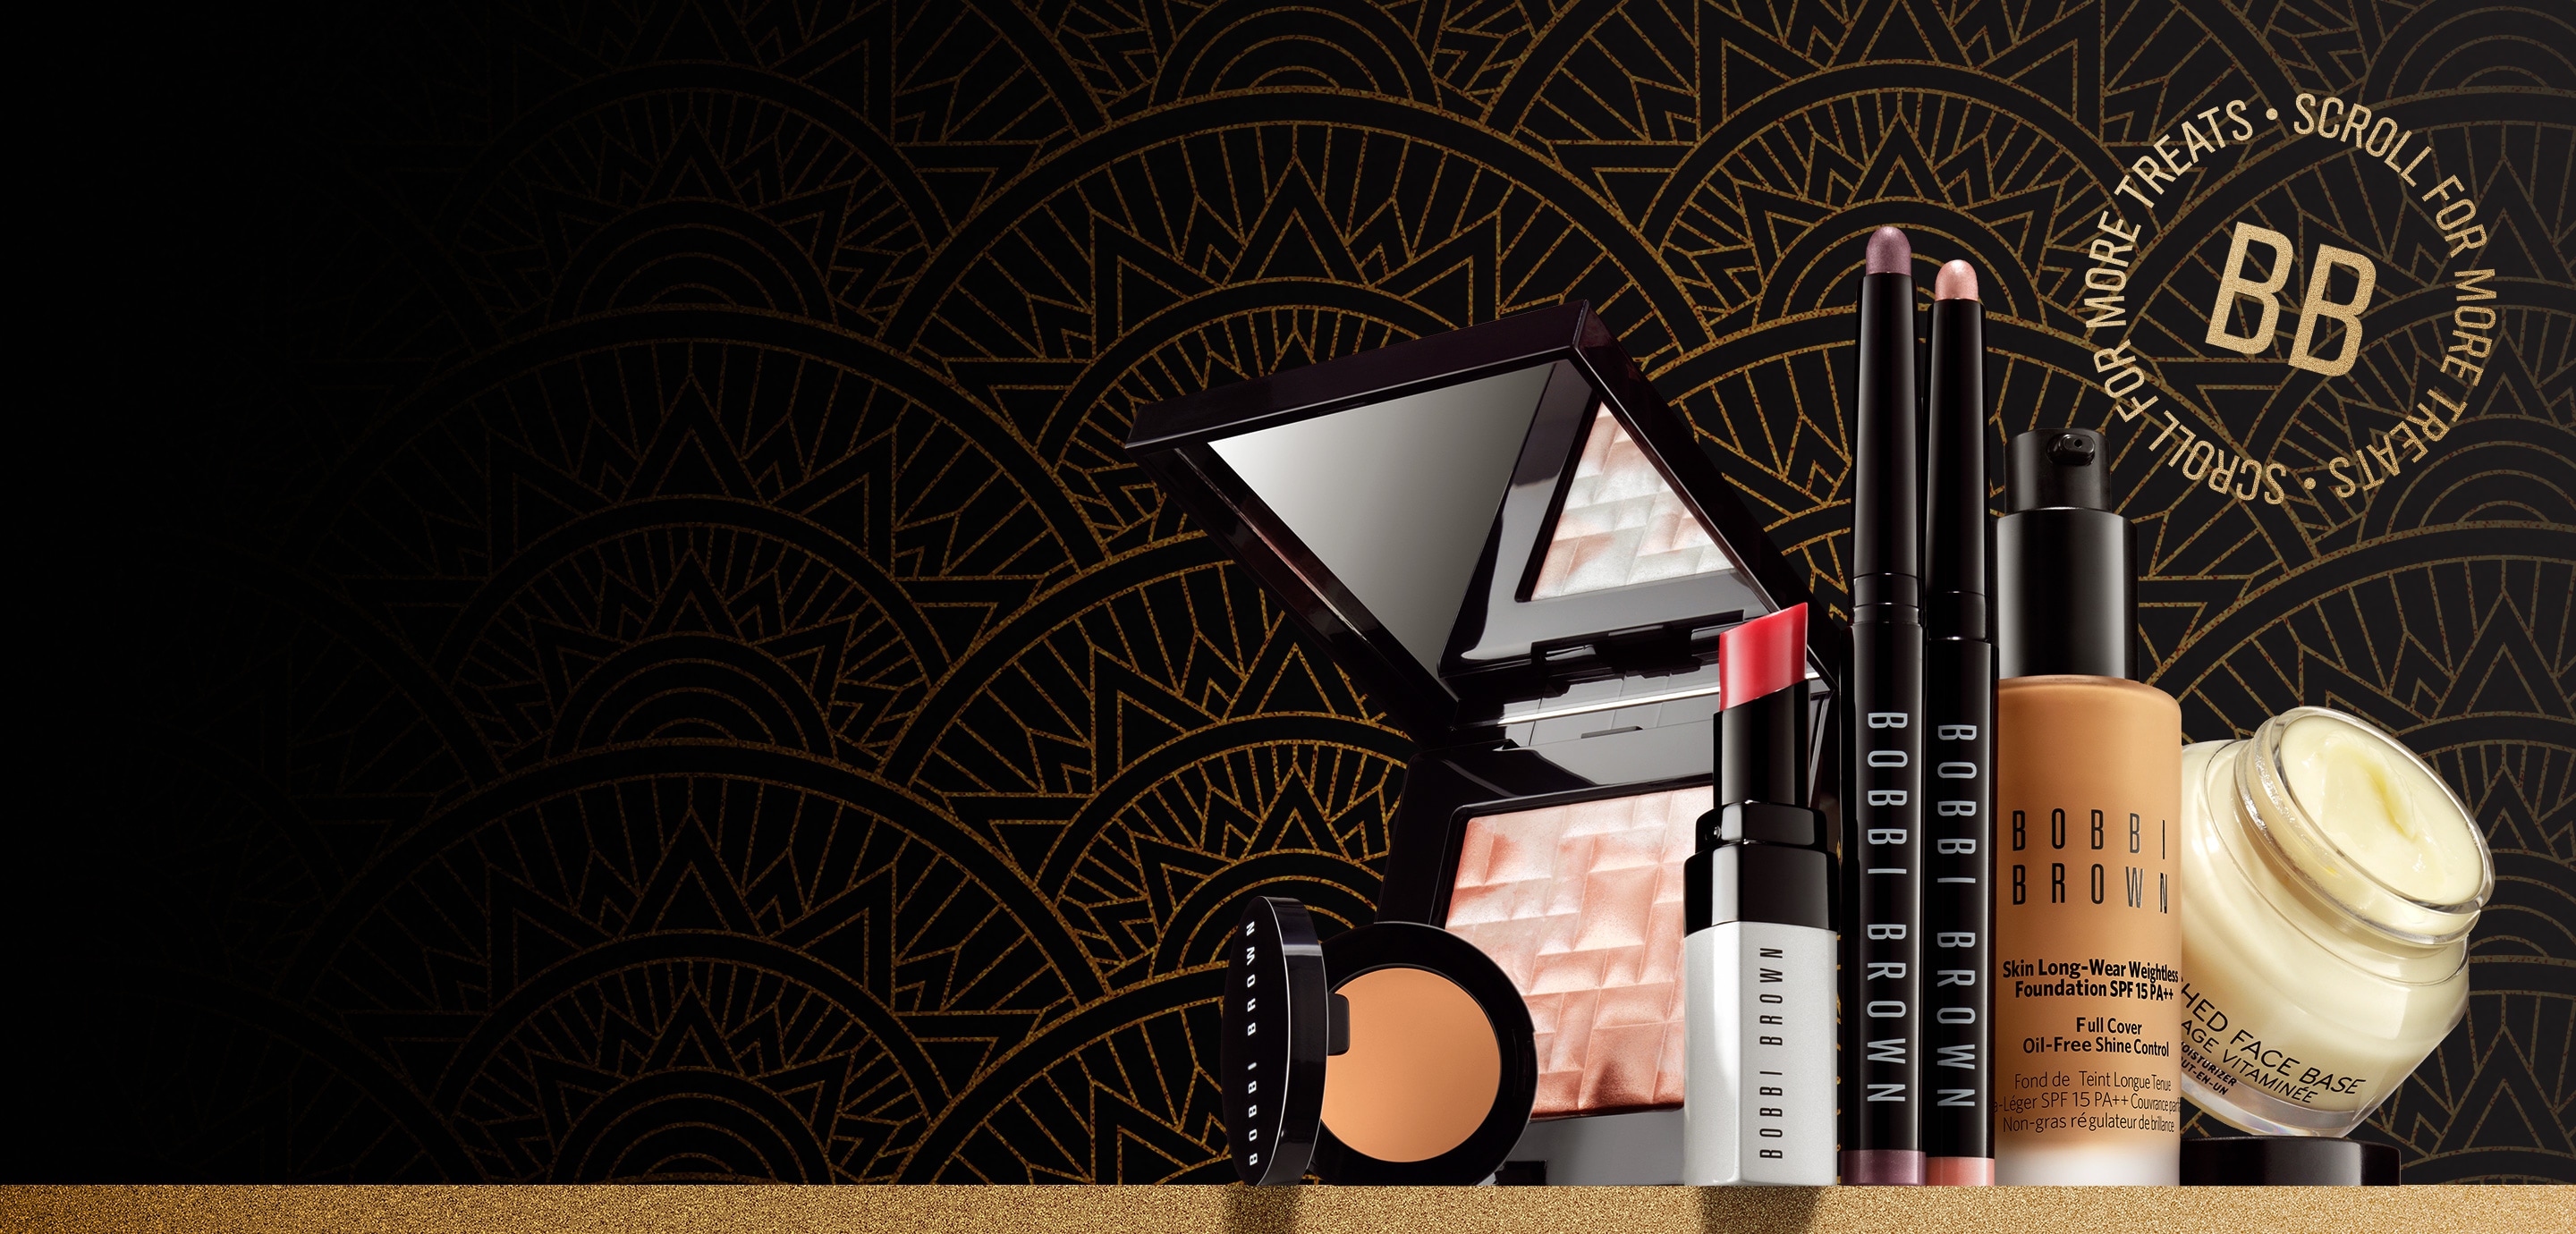 Bestselling Bobbi Brown favourites on a gold shelf, in front of a gold deco pattern